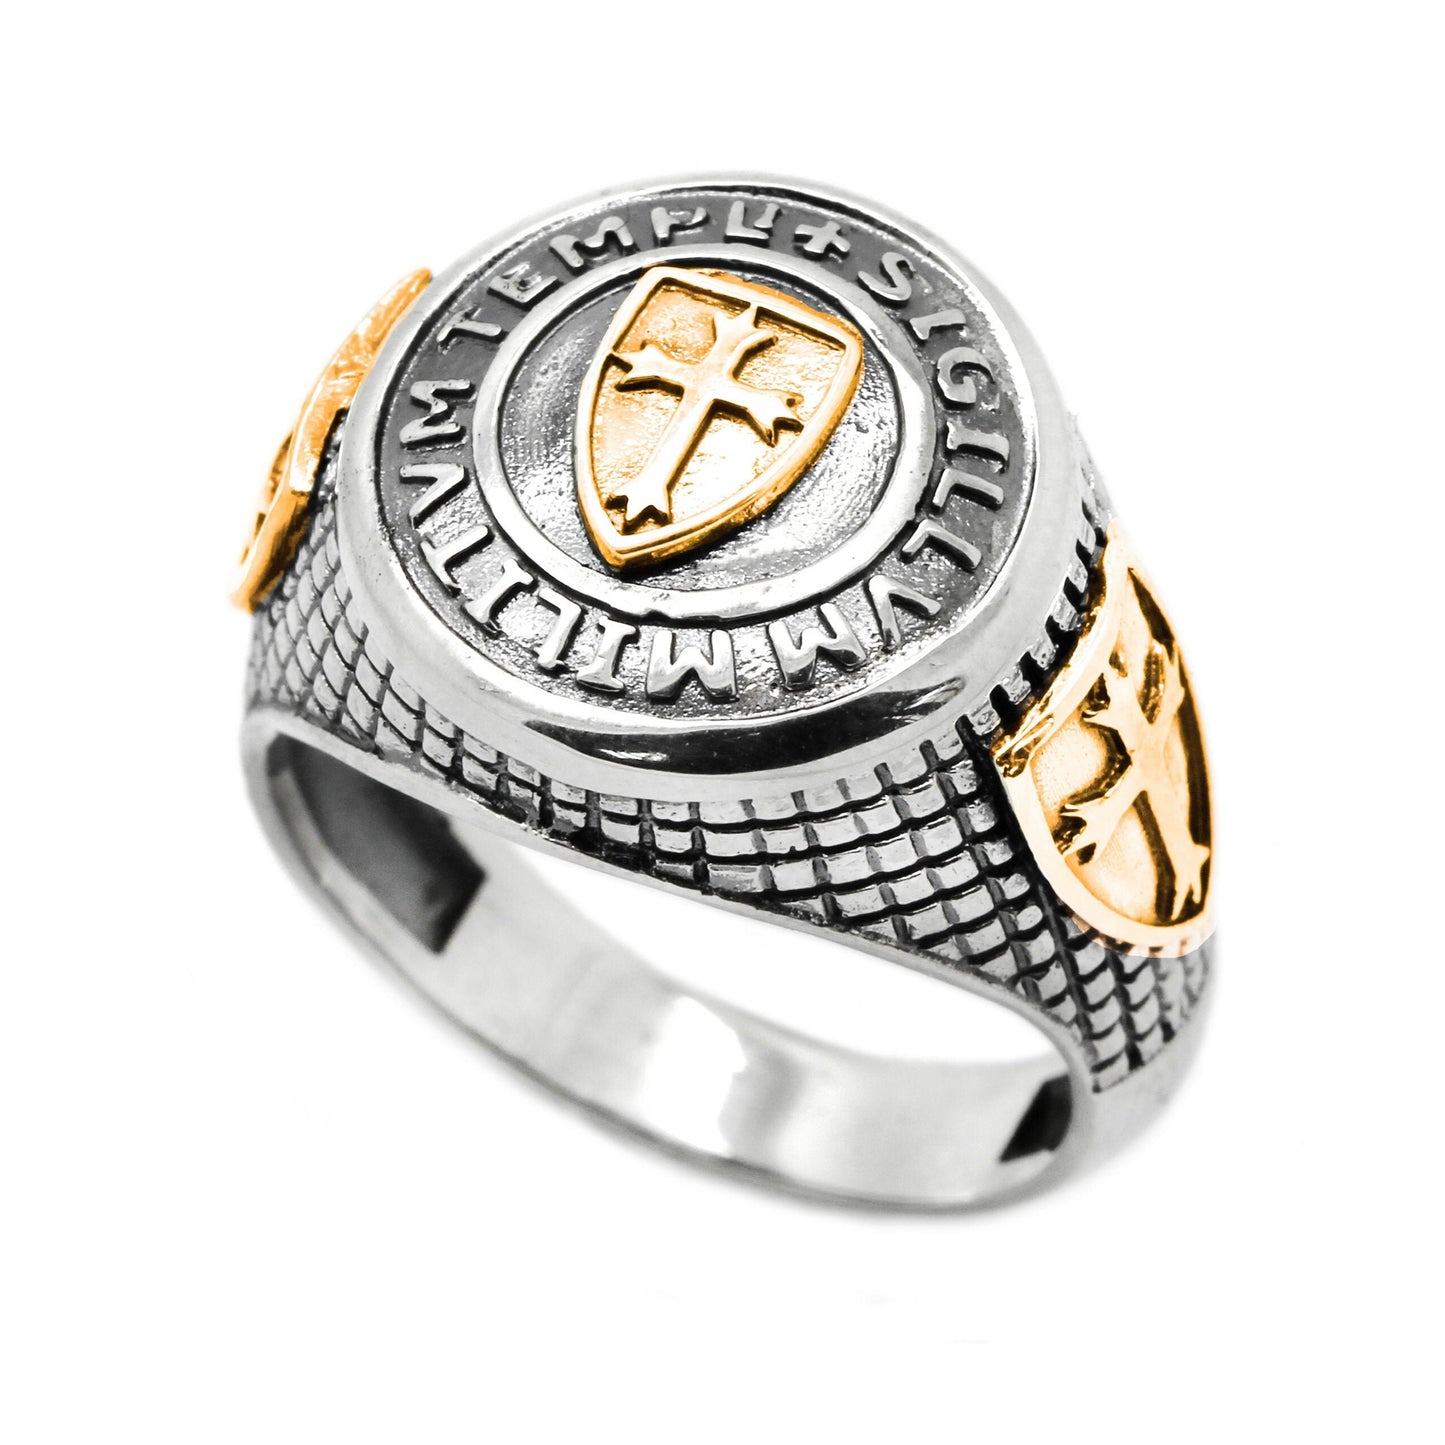 The Seal of Soldiers of Temple Ring Silver 925 and Gold 14K